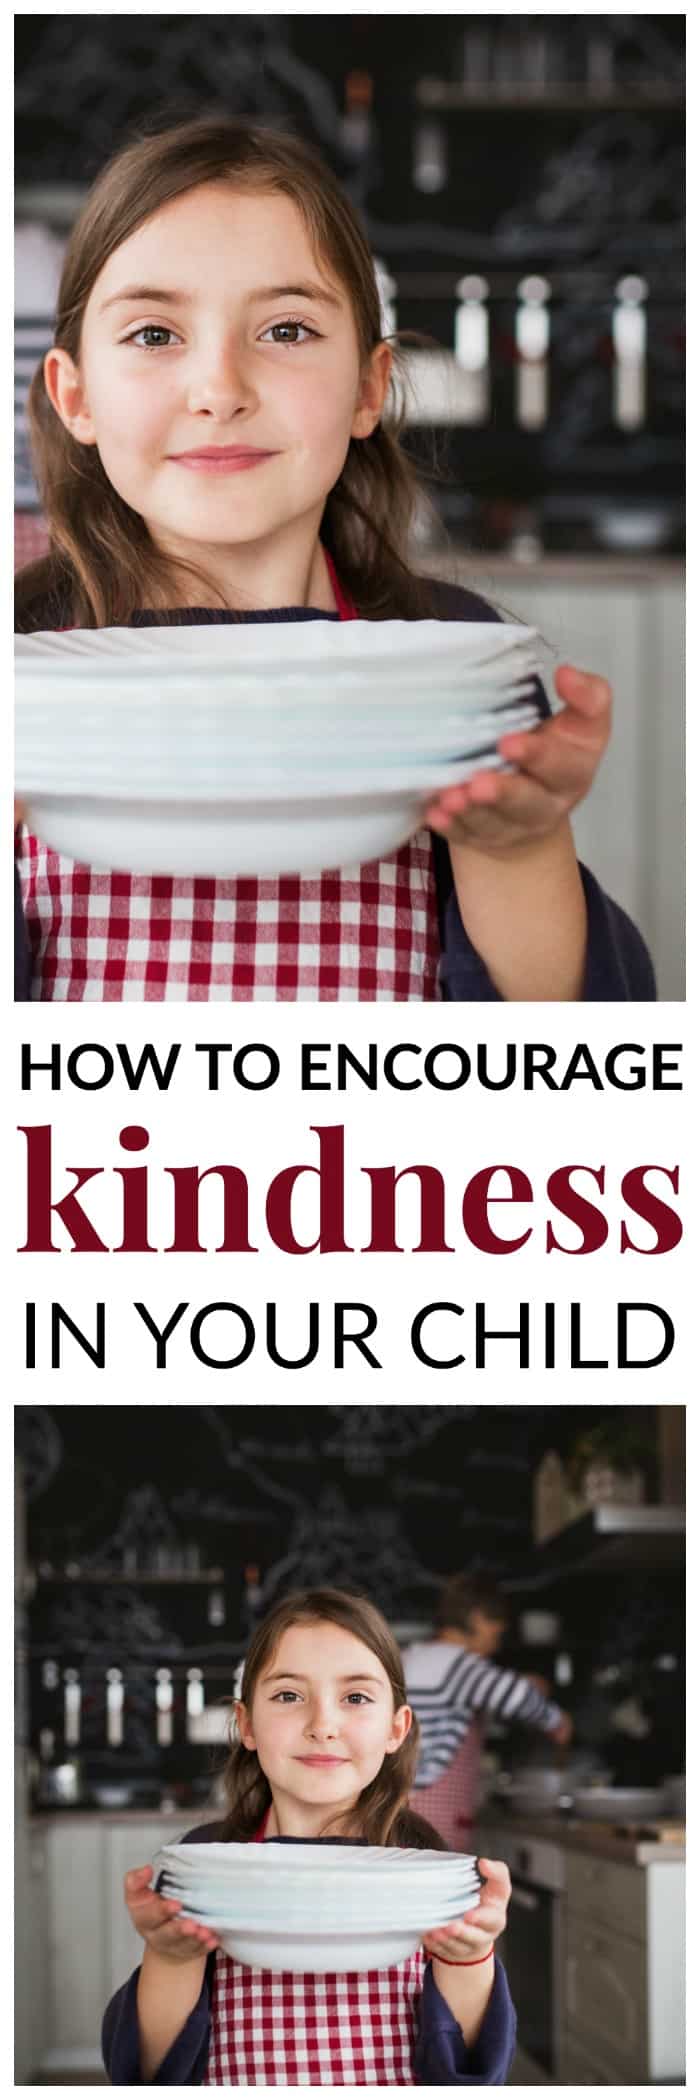 Tips to encourage kindness in your child